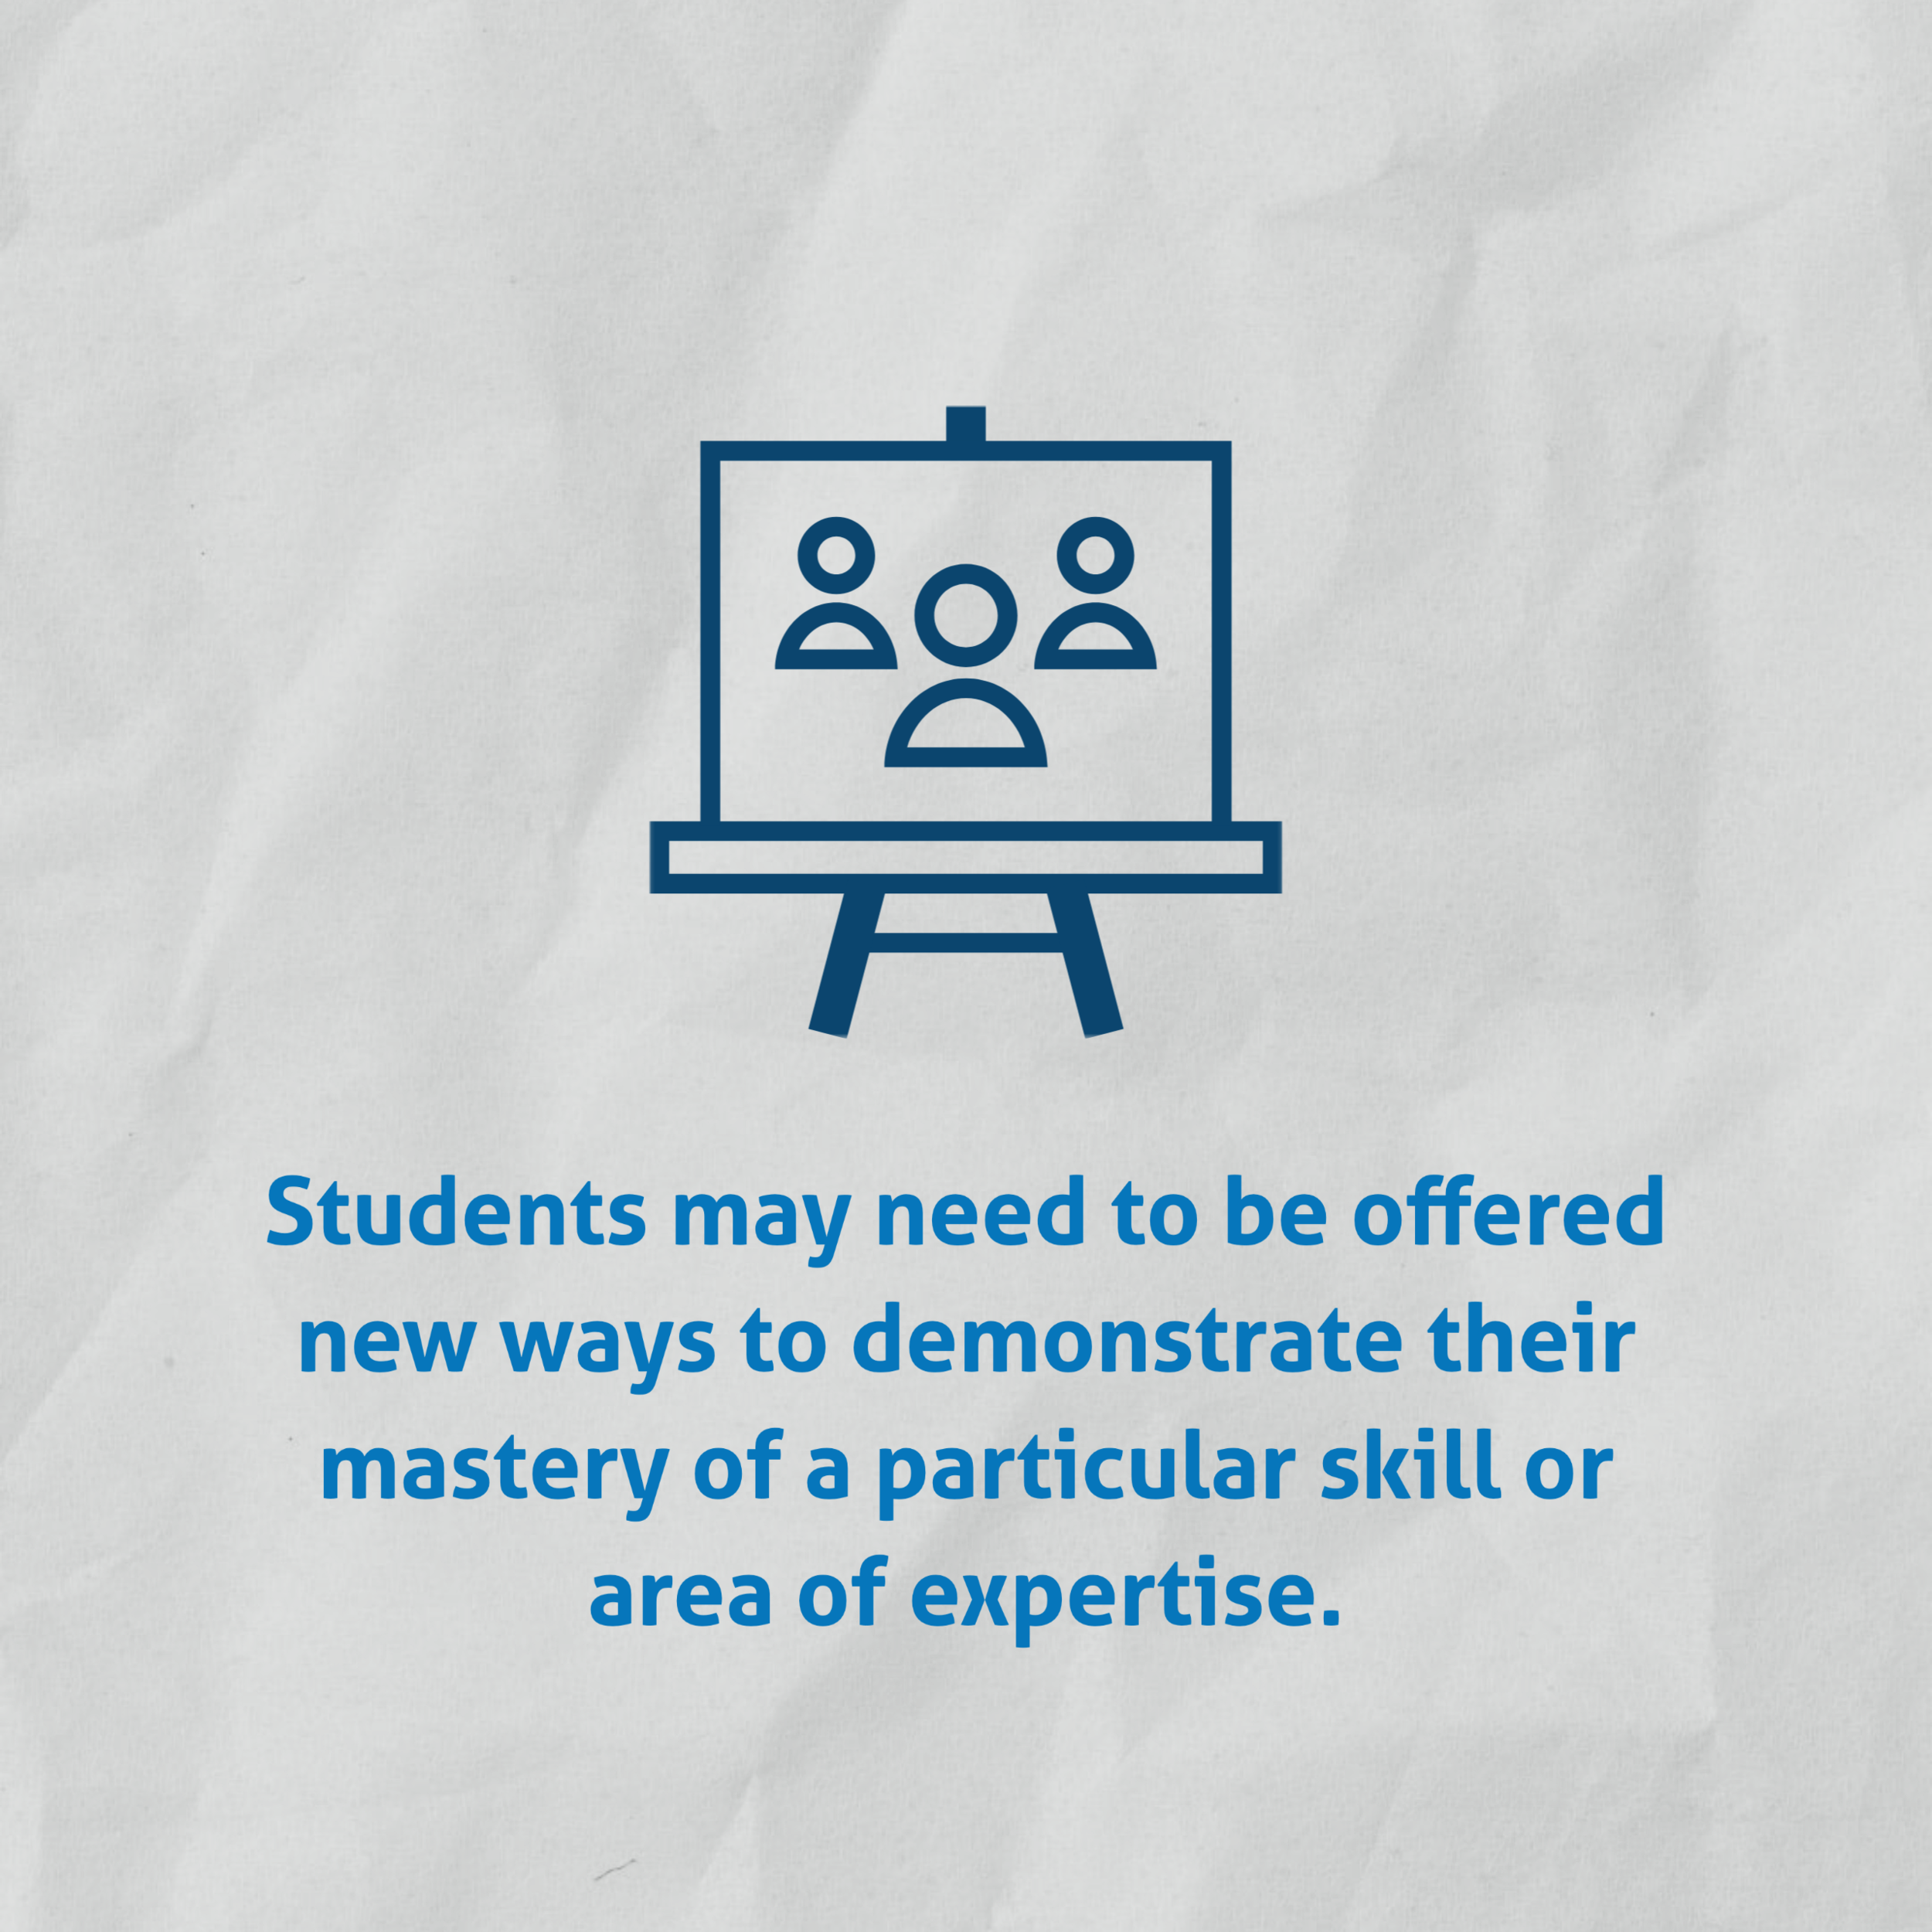 Students may need to be offered new ways to demonstrate their mastery of a particular skill or area of expertise.